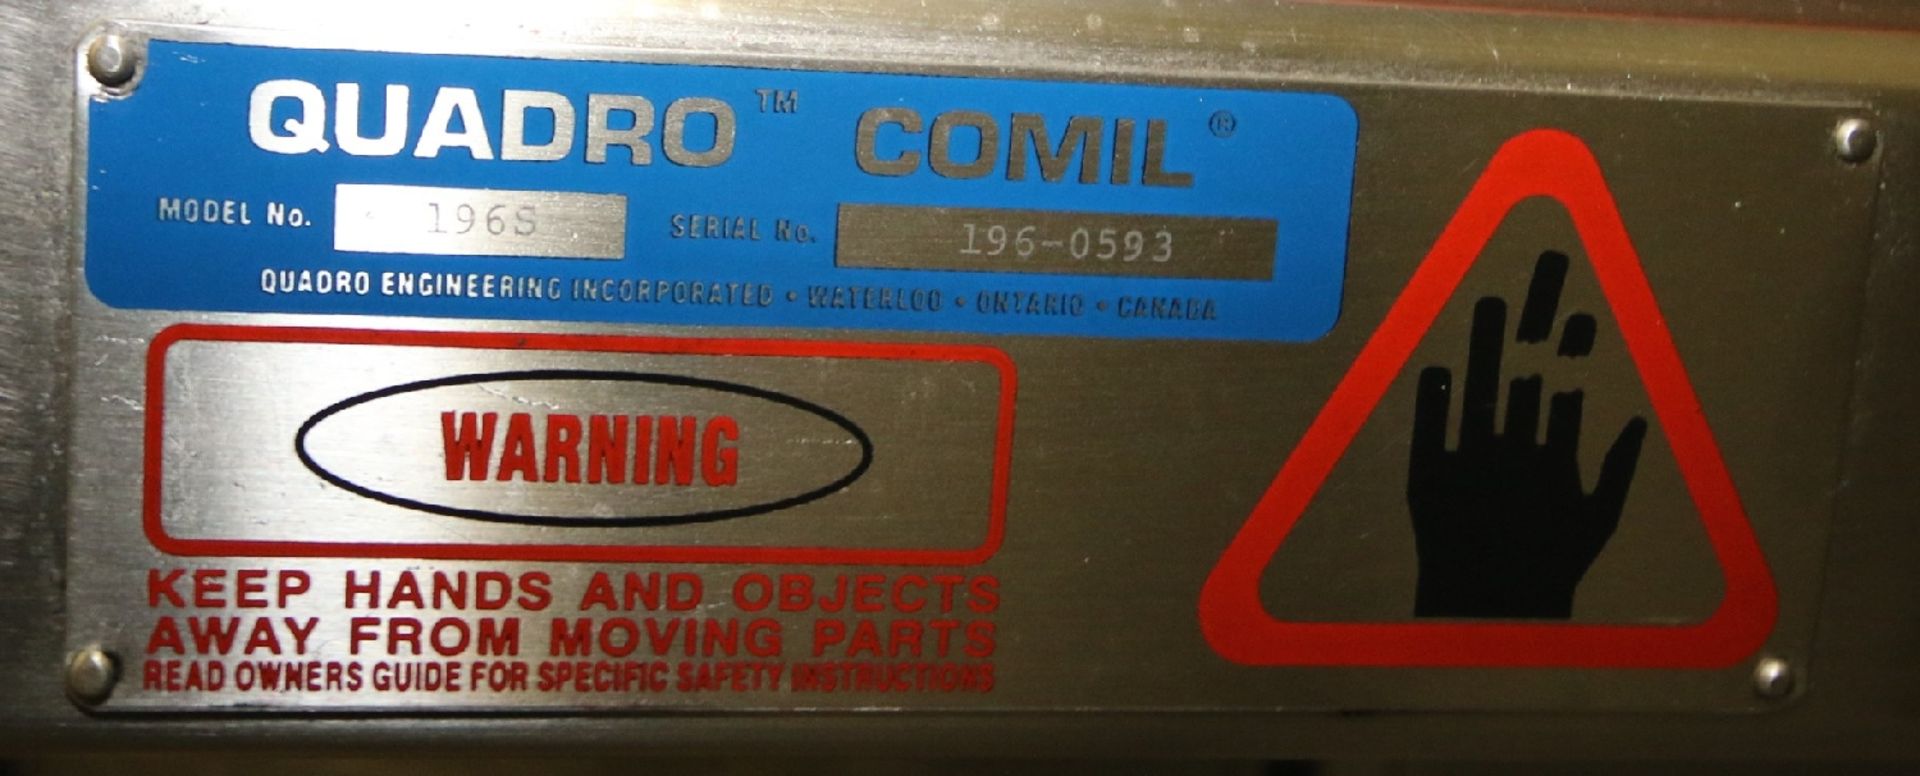 Quadro S/S Comil, Model 196S, S/N 196-0593 with 10 hp Motor and Allen Bradley 25 hp/600 Amp Control, - Image 6 of 8